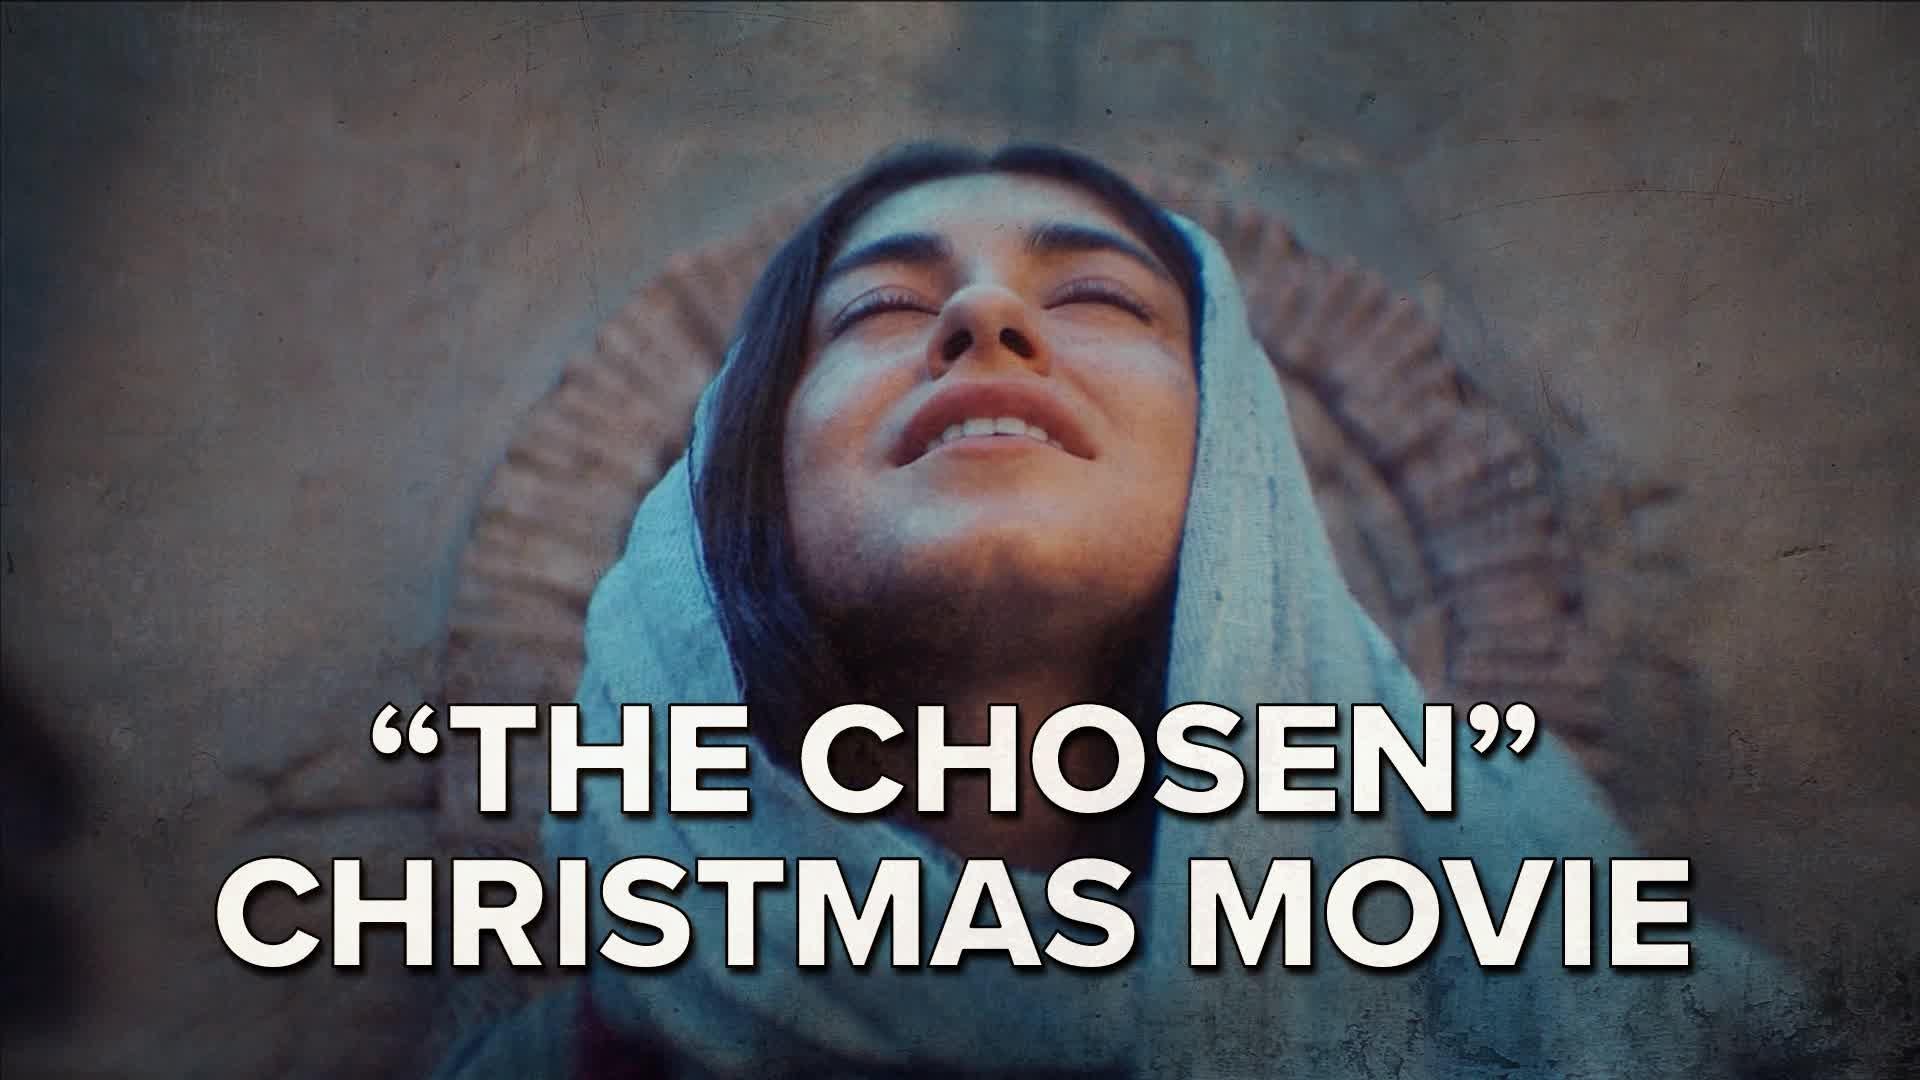 Christian World News Behind the Scenes at “The Chosen” Christmas